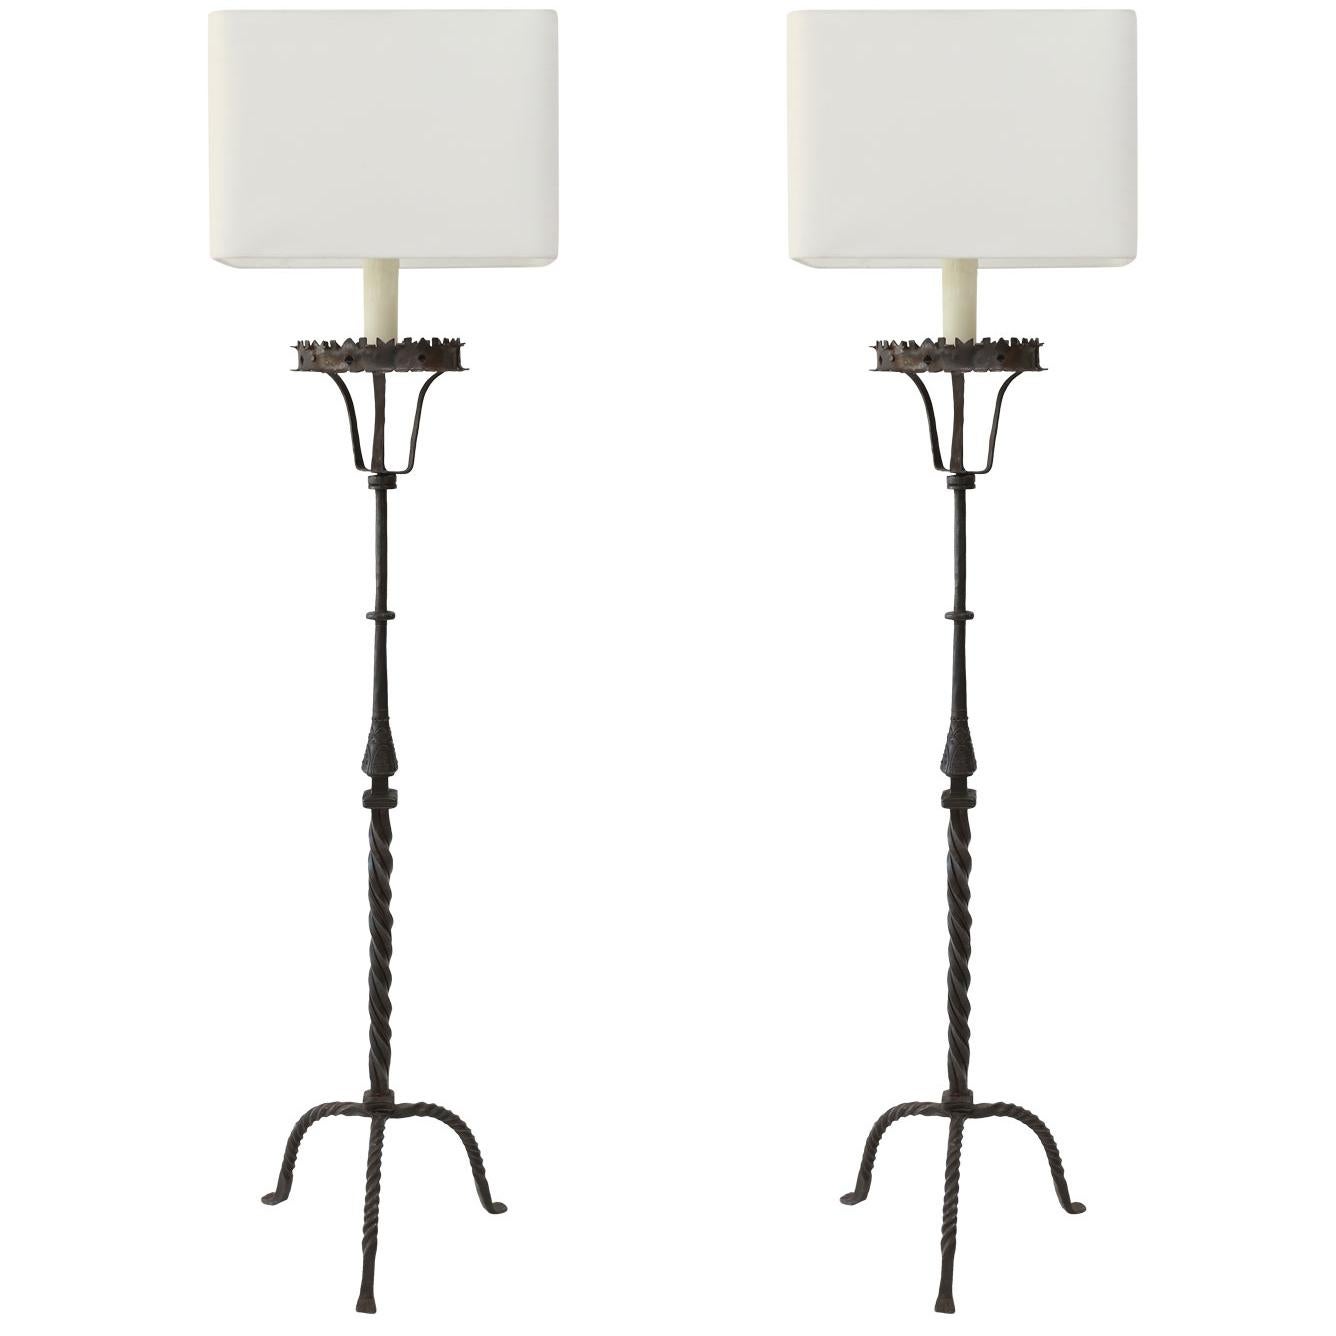 Two Tall Forged Iron Floor Lamps